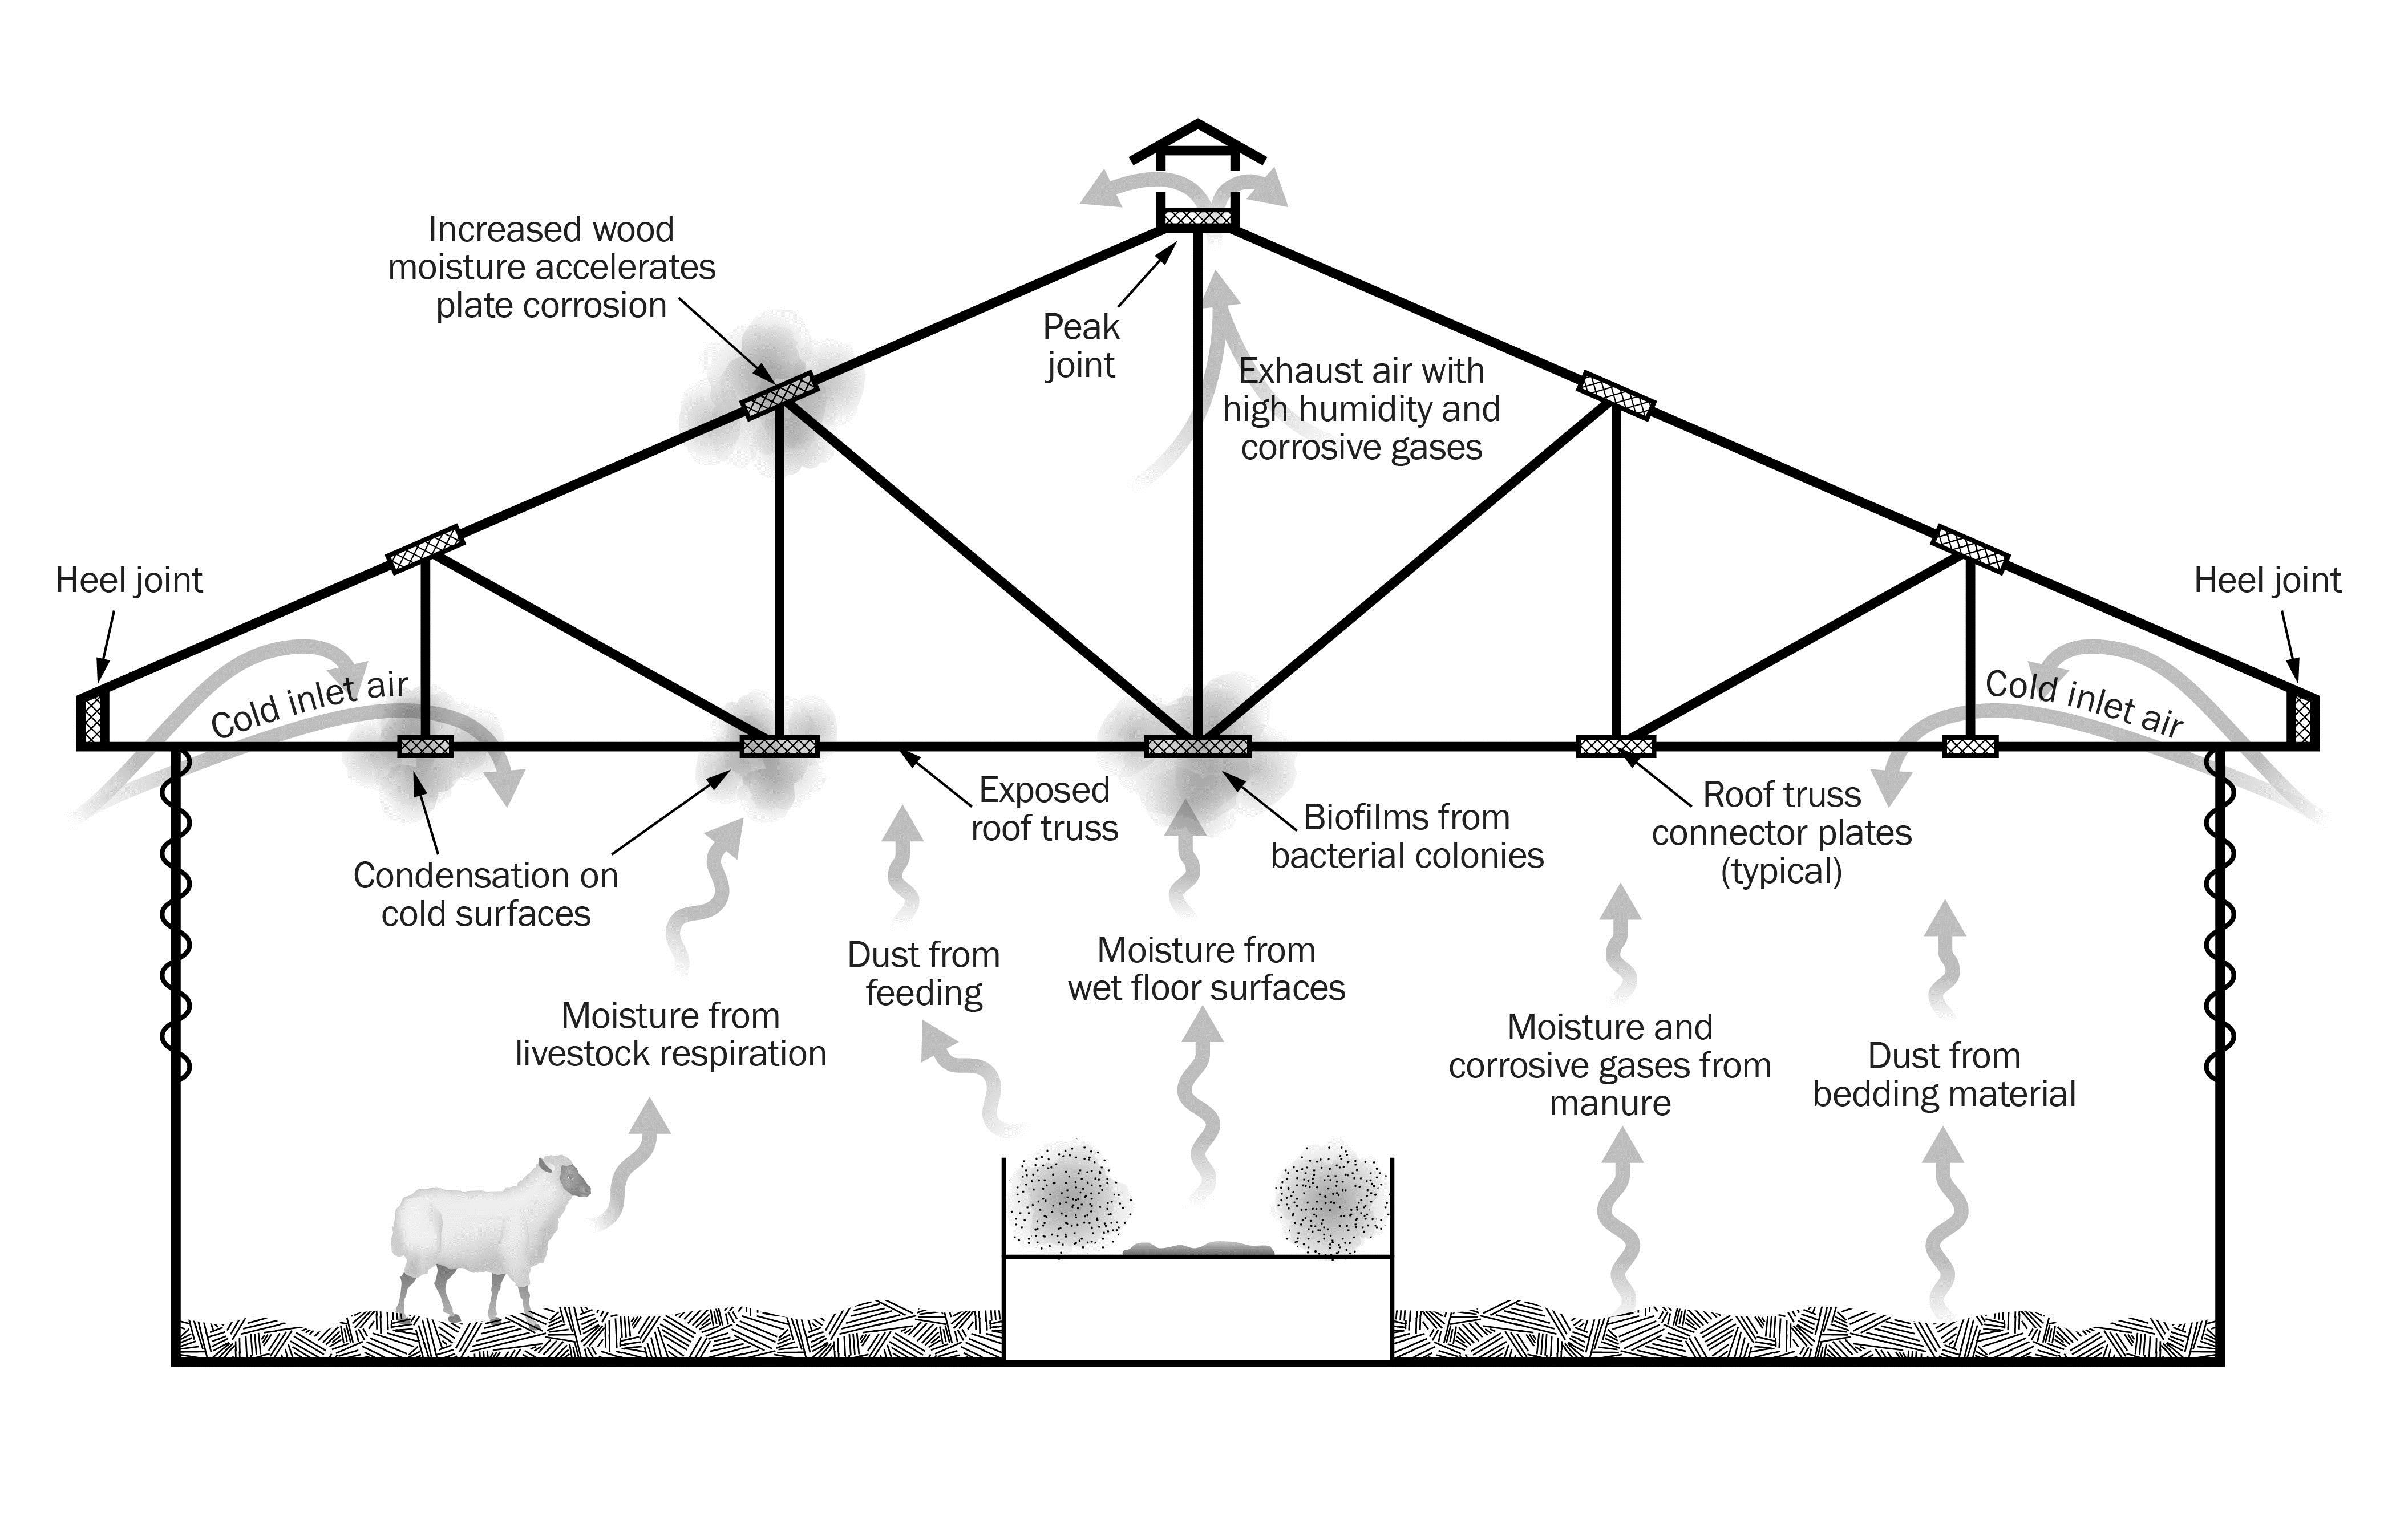 A cross section of an unheated sheep barn that has no ceiling, exposing the trusses to the indoor environment. The sketch shows some typical sources of moisture, corrosive gases and dust in a barn environment.